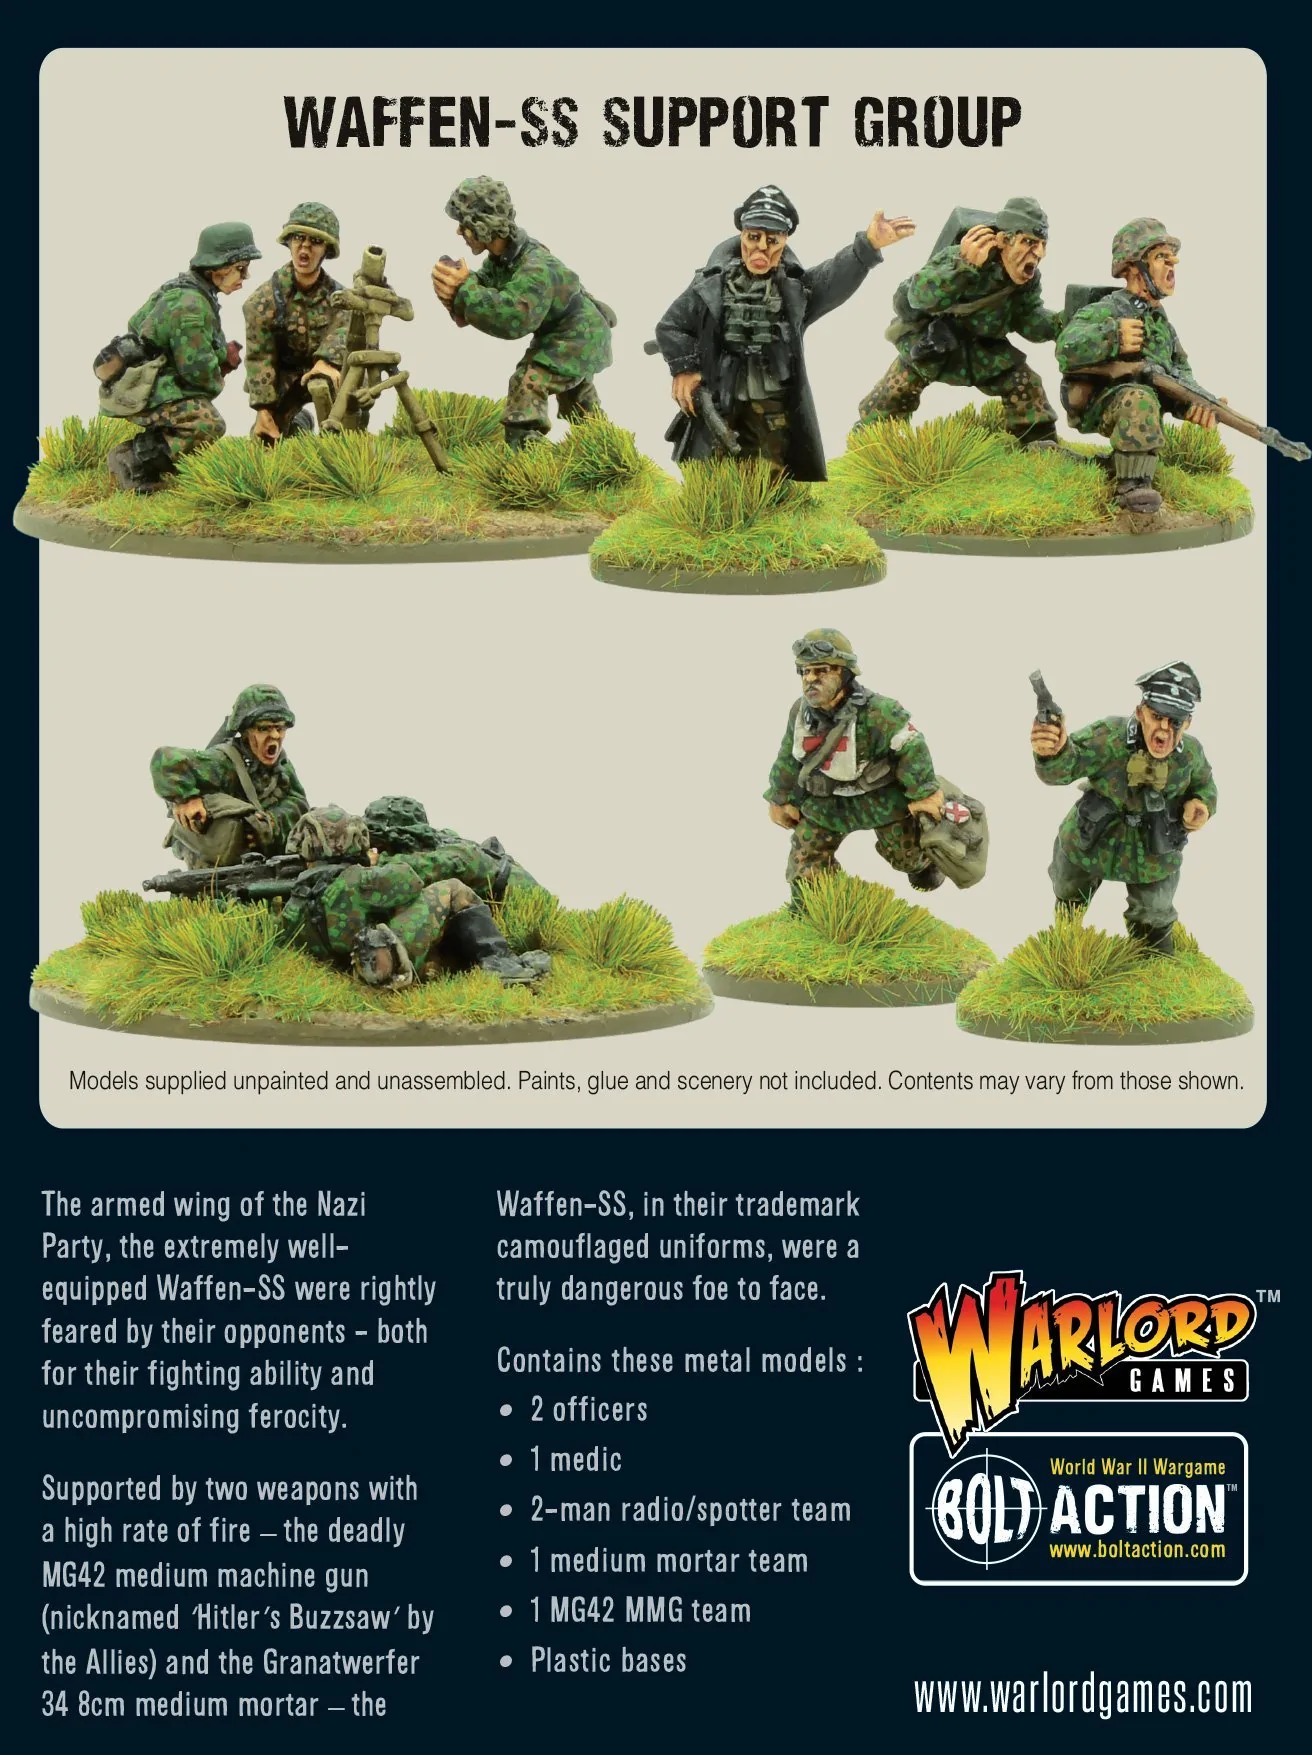 402212107_Waffen-SS_Support_Group_box_back (1)